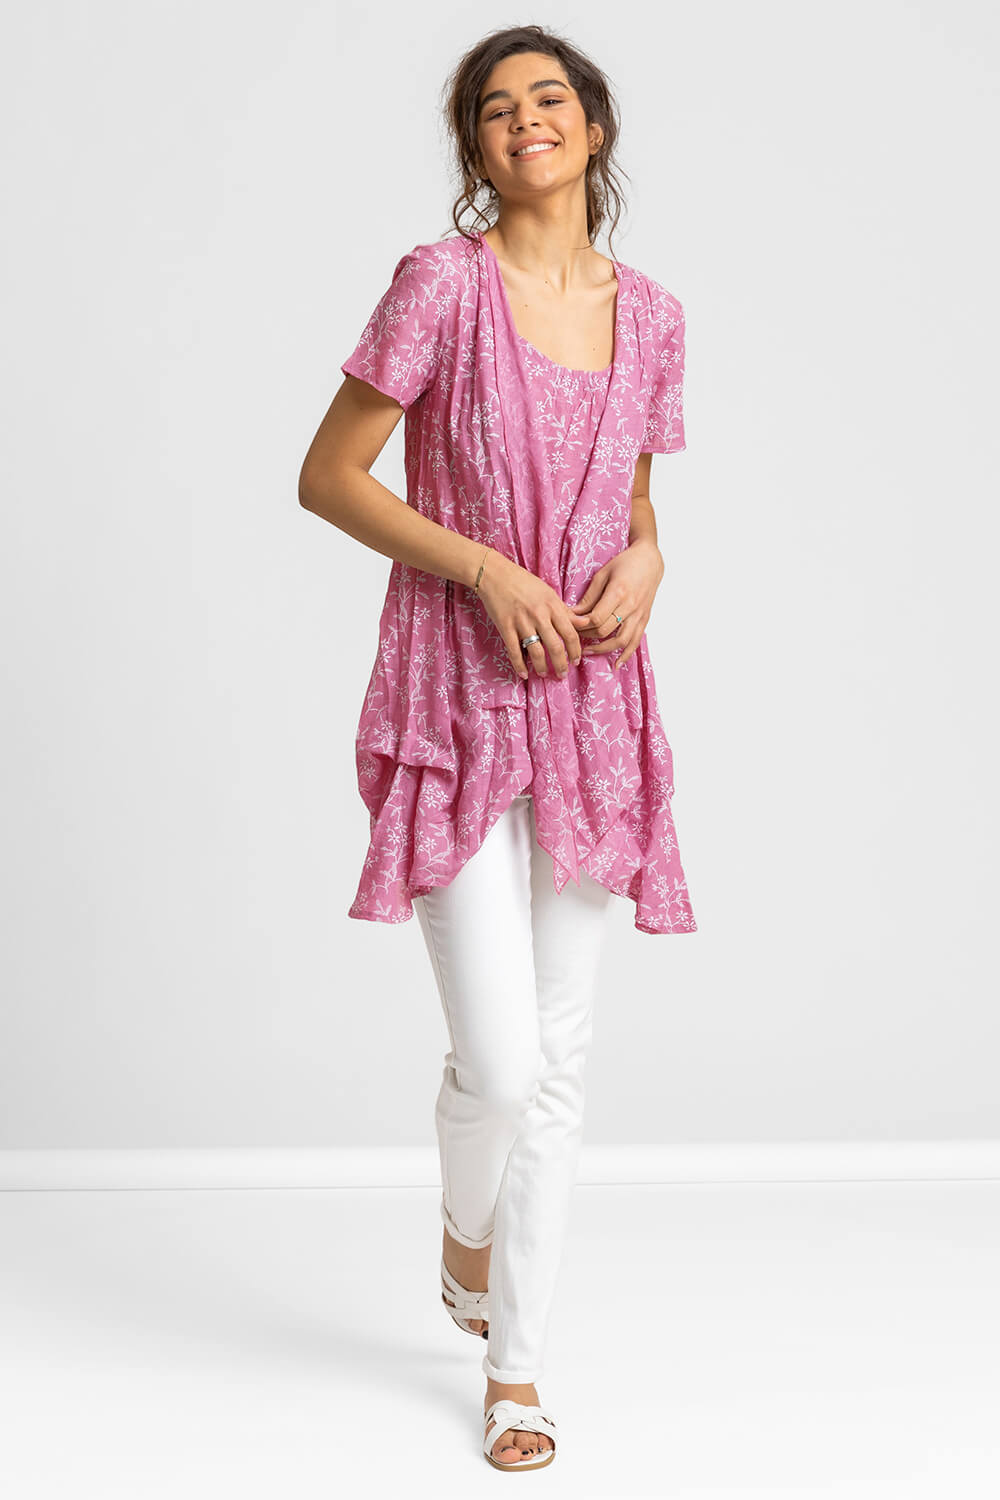 Mauve Floral Print Crinkle Tunic Top, Image 3 of 4